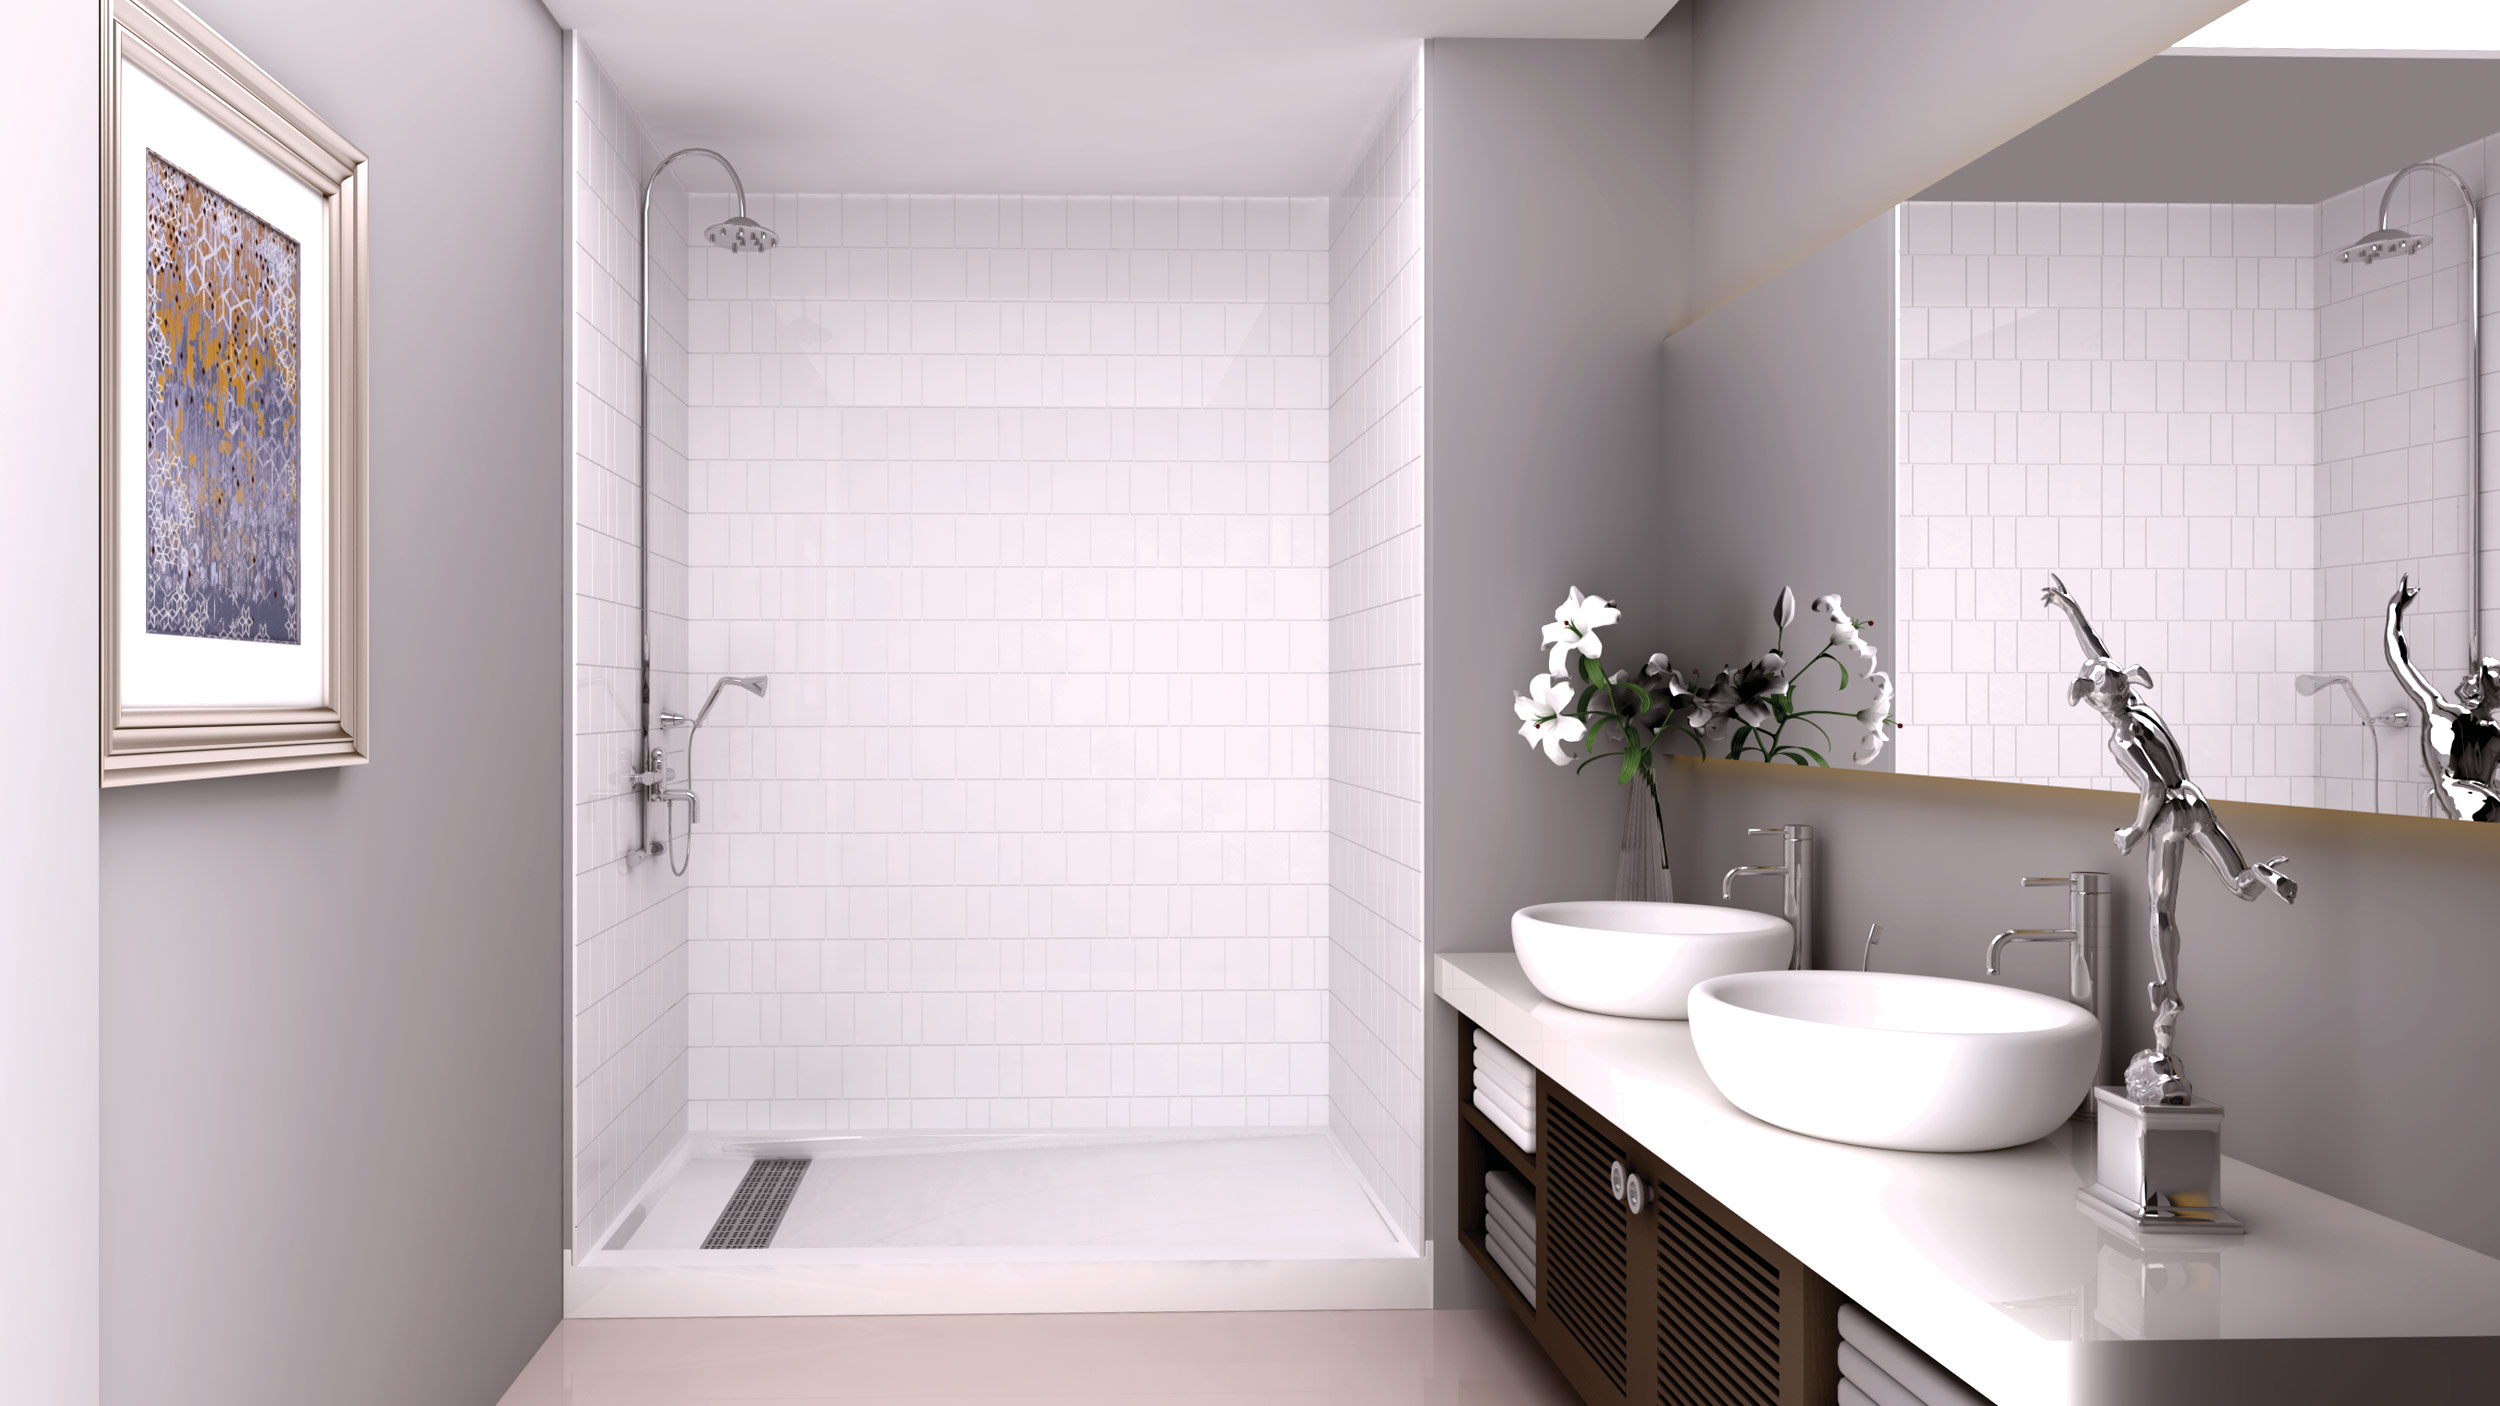 SOAP DISHES AND SHAMPOO SHELVES - IMI Today  Cultured Marble Shower & Bath  Professionals